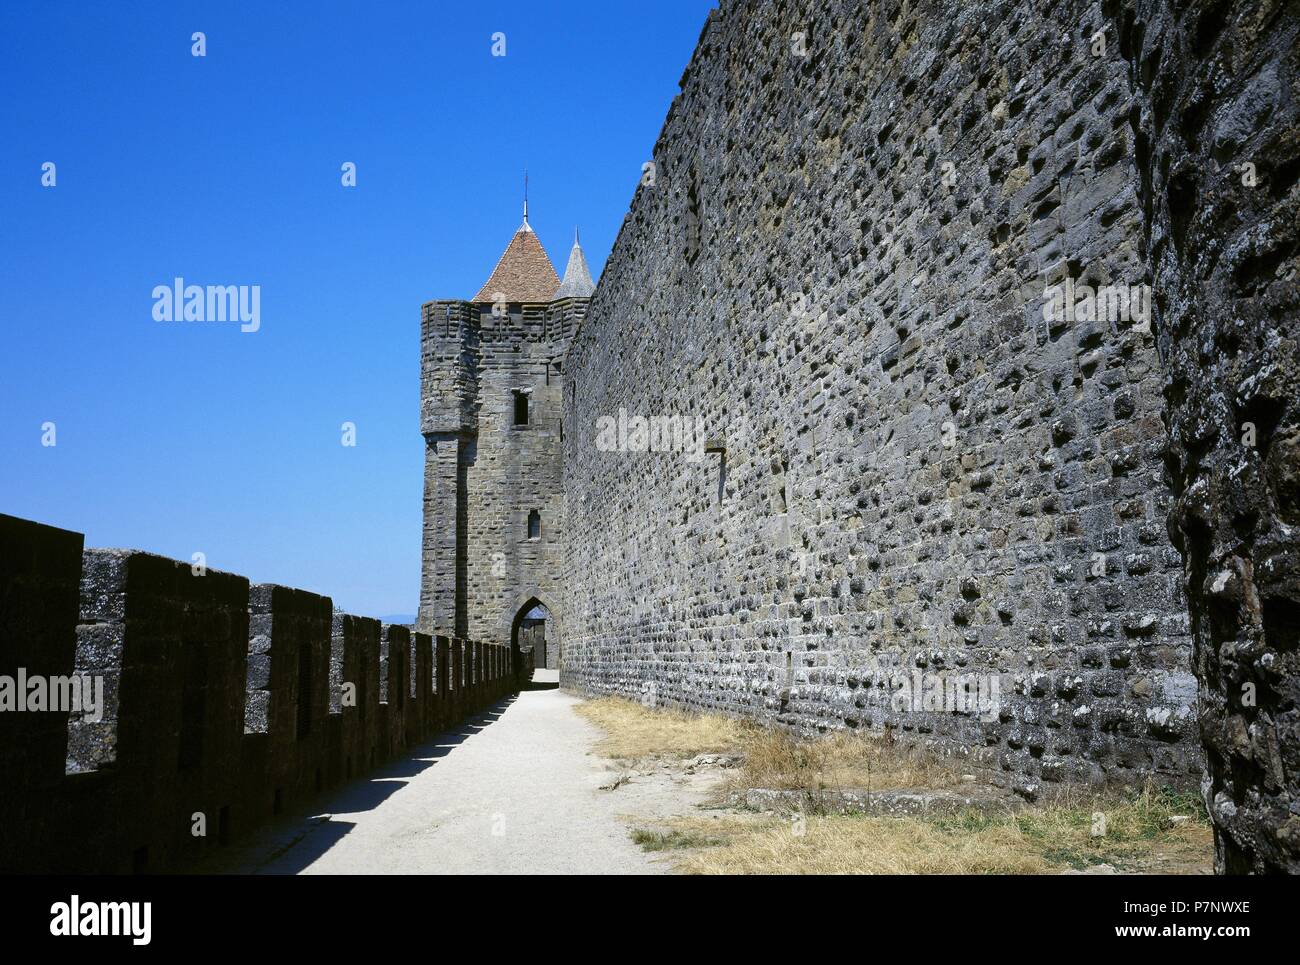 France. Carcassone. Walls of the Cite de Carcassonne. Medieval fortress restored by Eugene Viollet-le Duc, 1853. Stock Photo